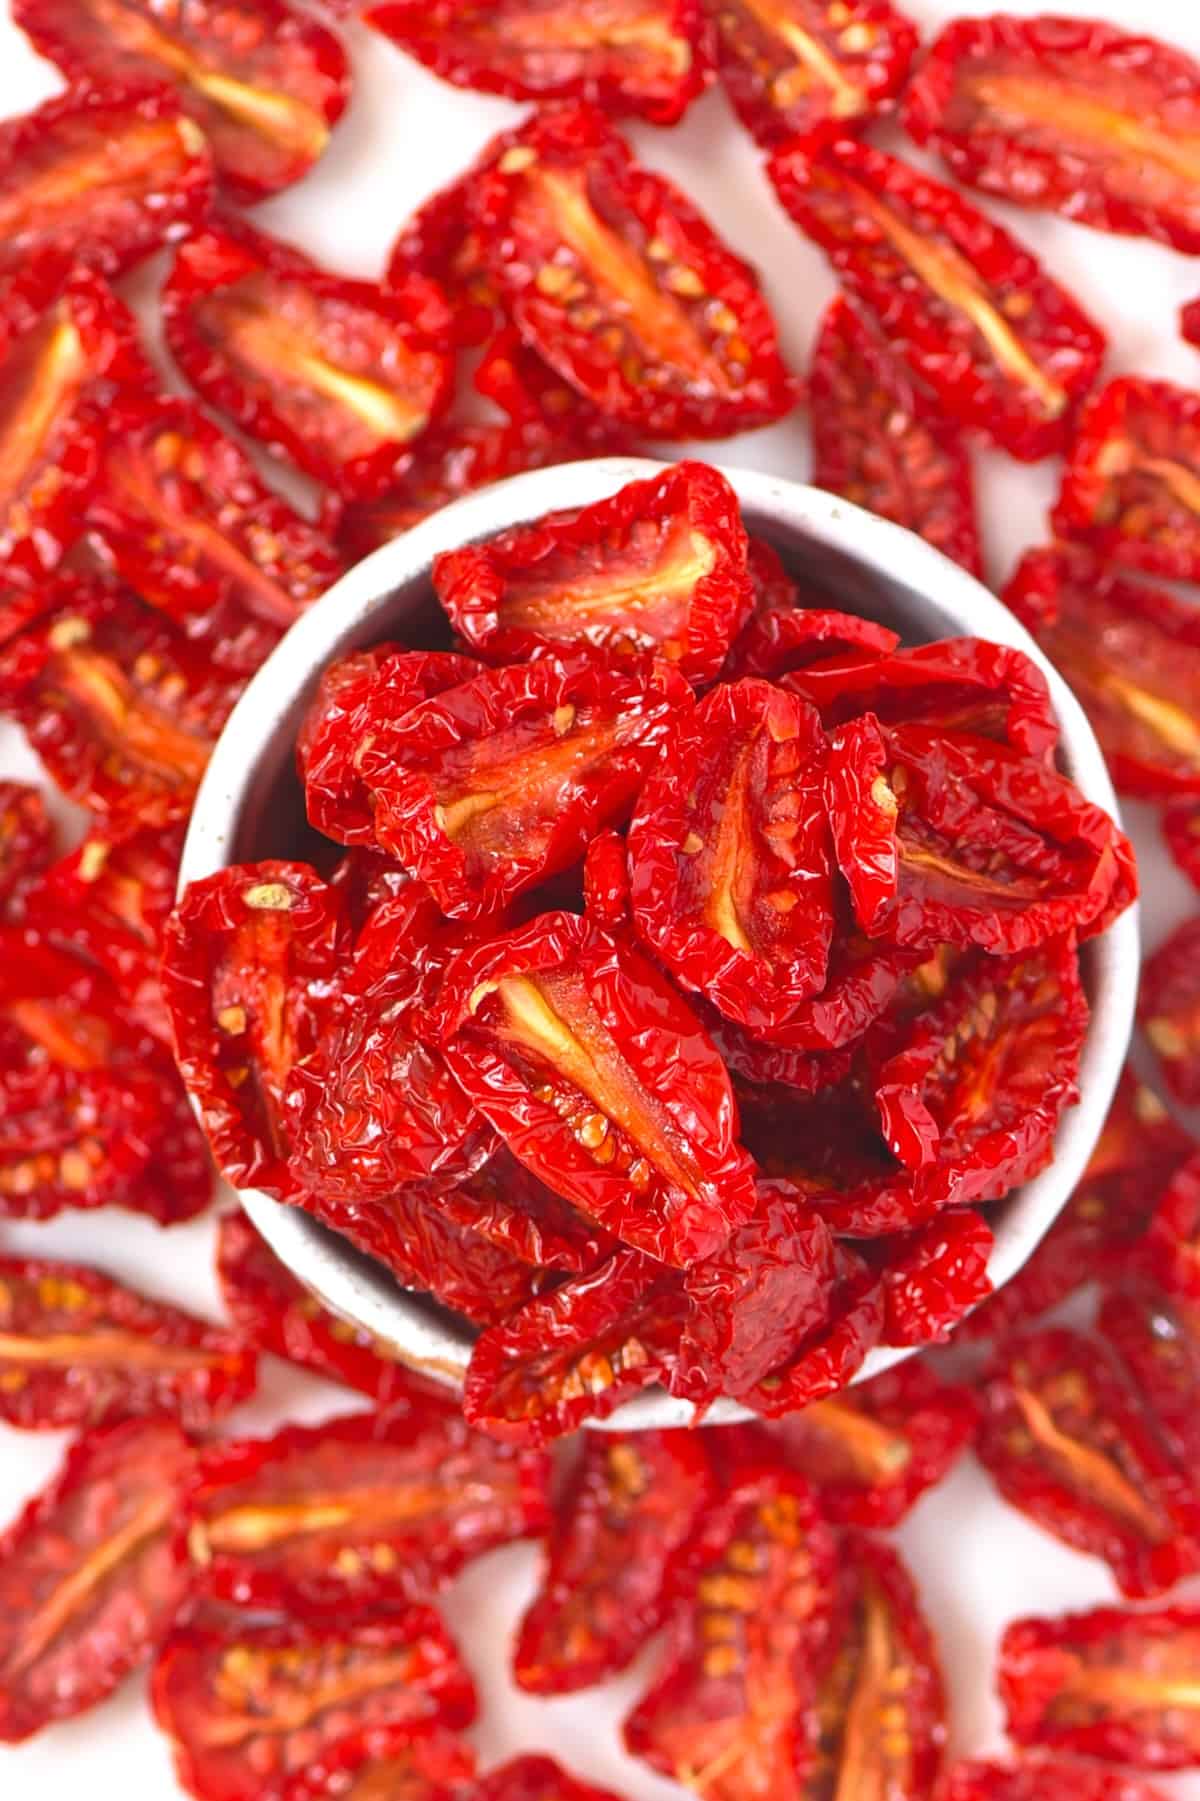 Sun dried tomatoes in a small white bowl